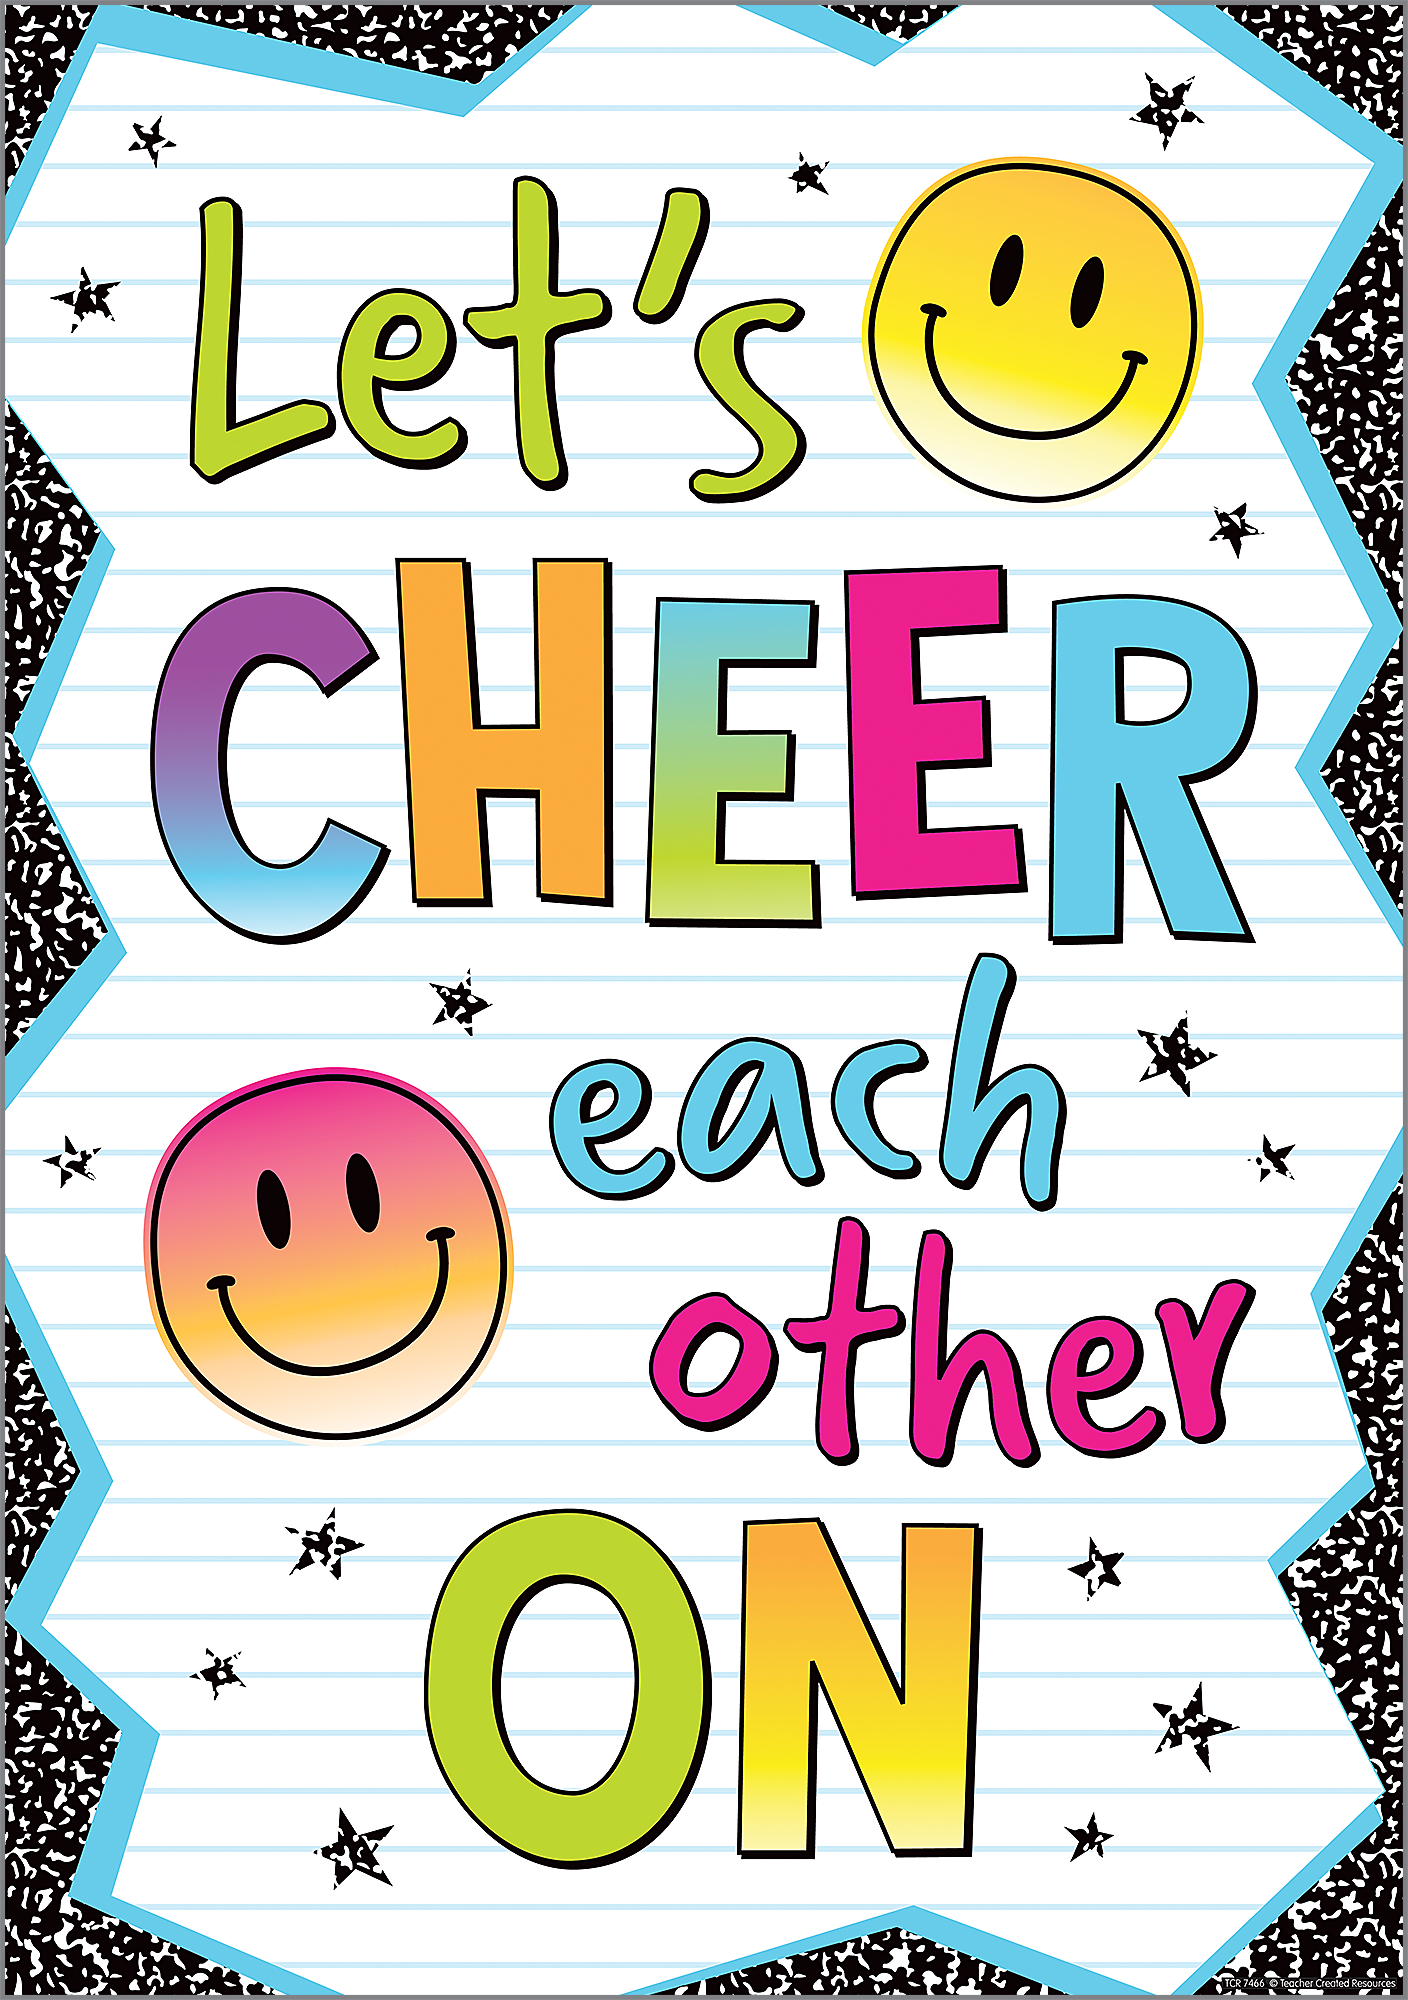 Let’s Cheer Each Other On Positive Poster